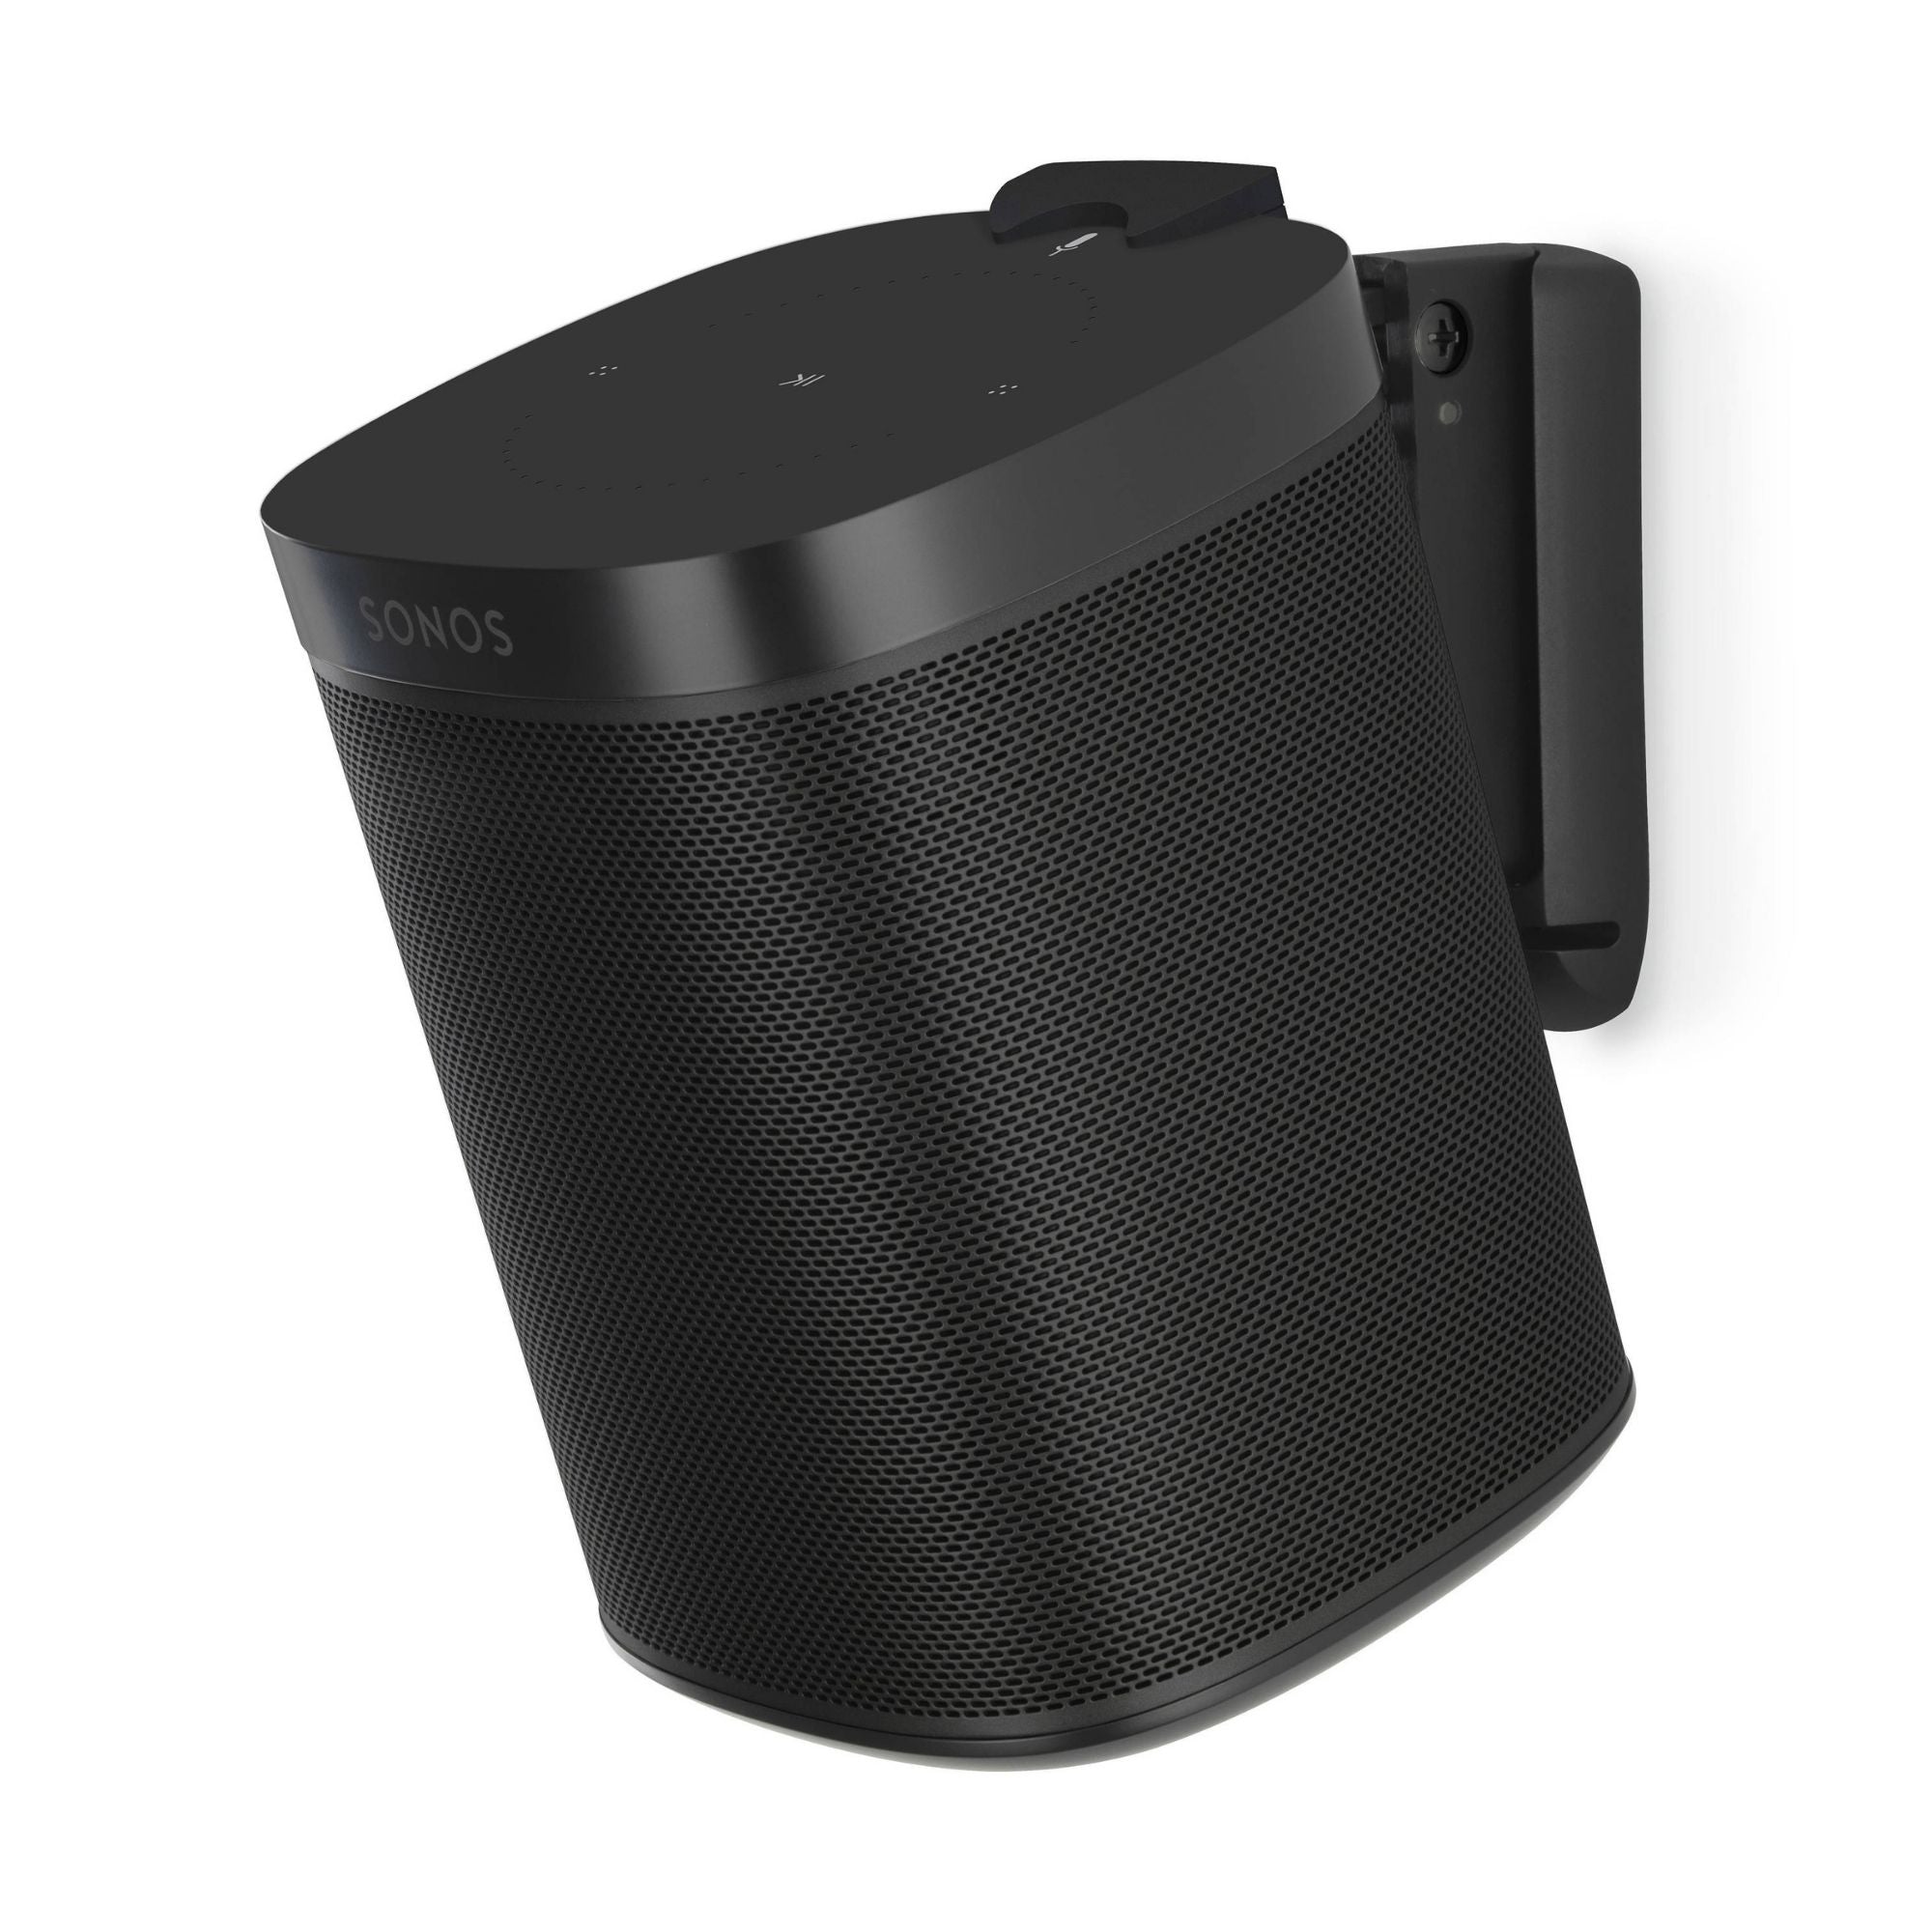 Sonos Flexson Wall Mount for Sonos One, One SL and Play:1 - AVStore